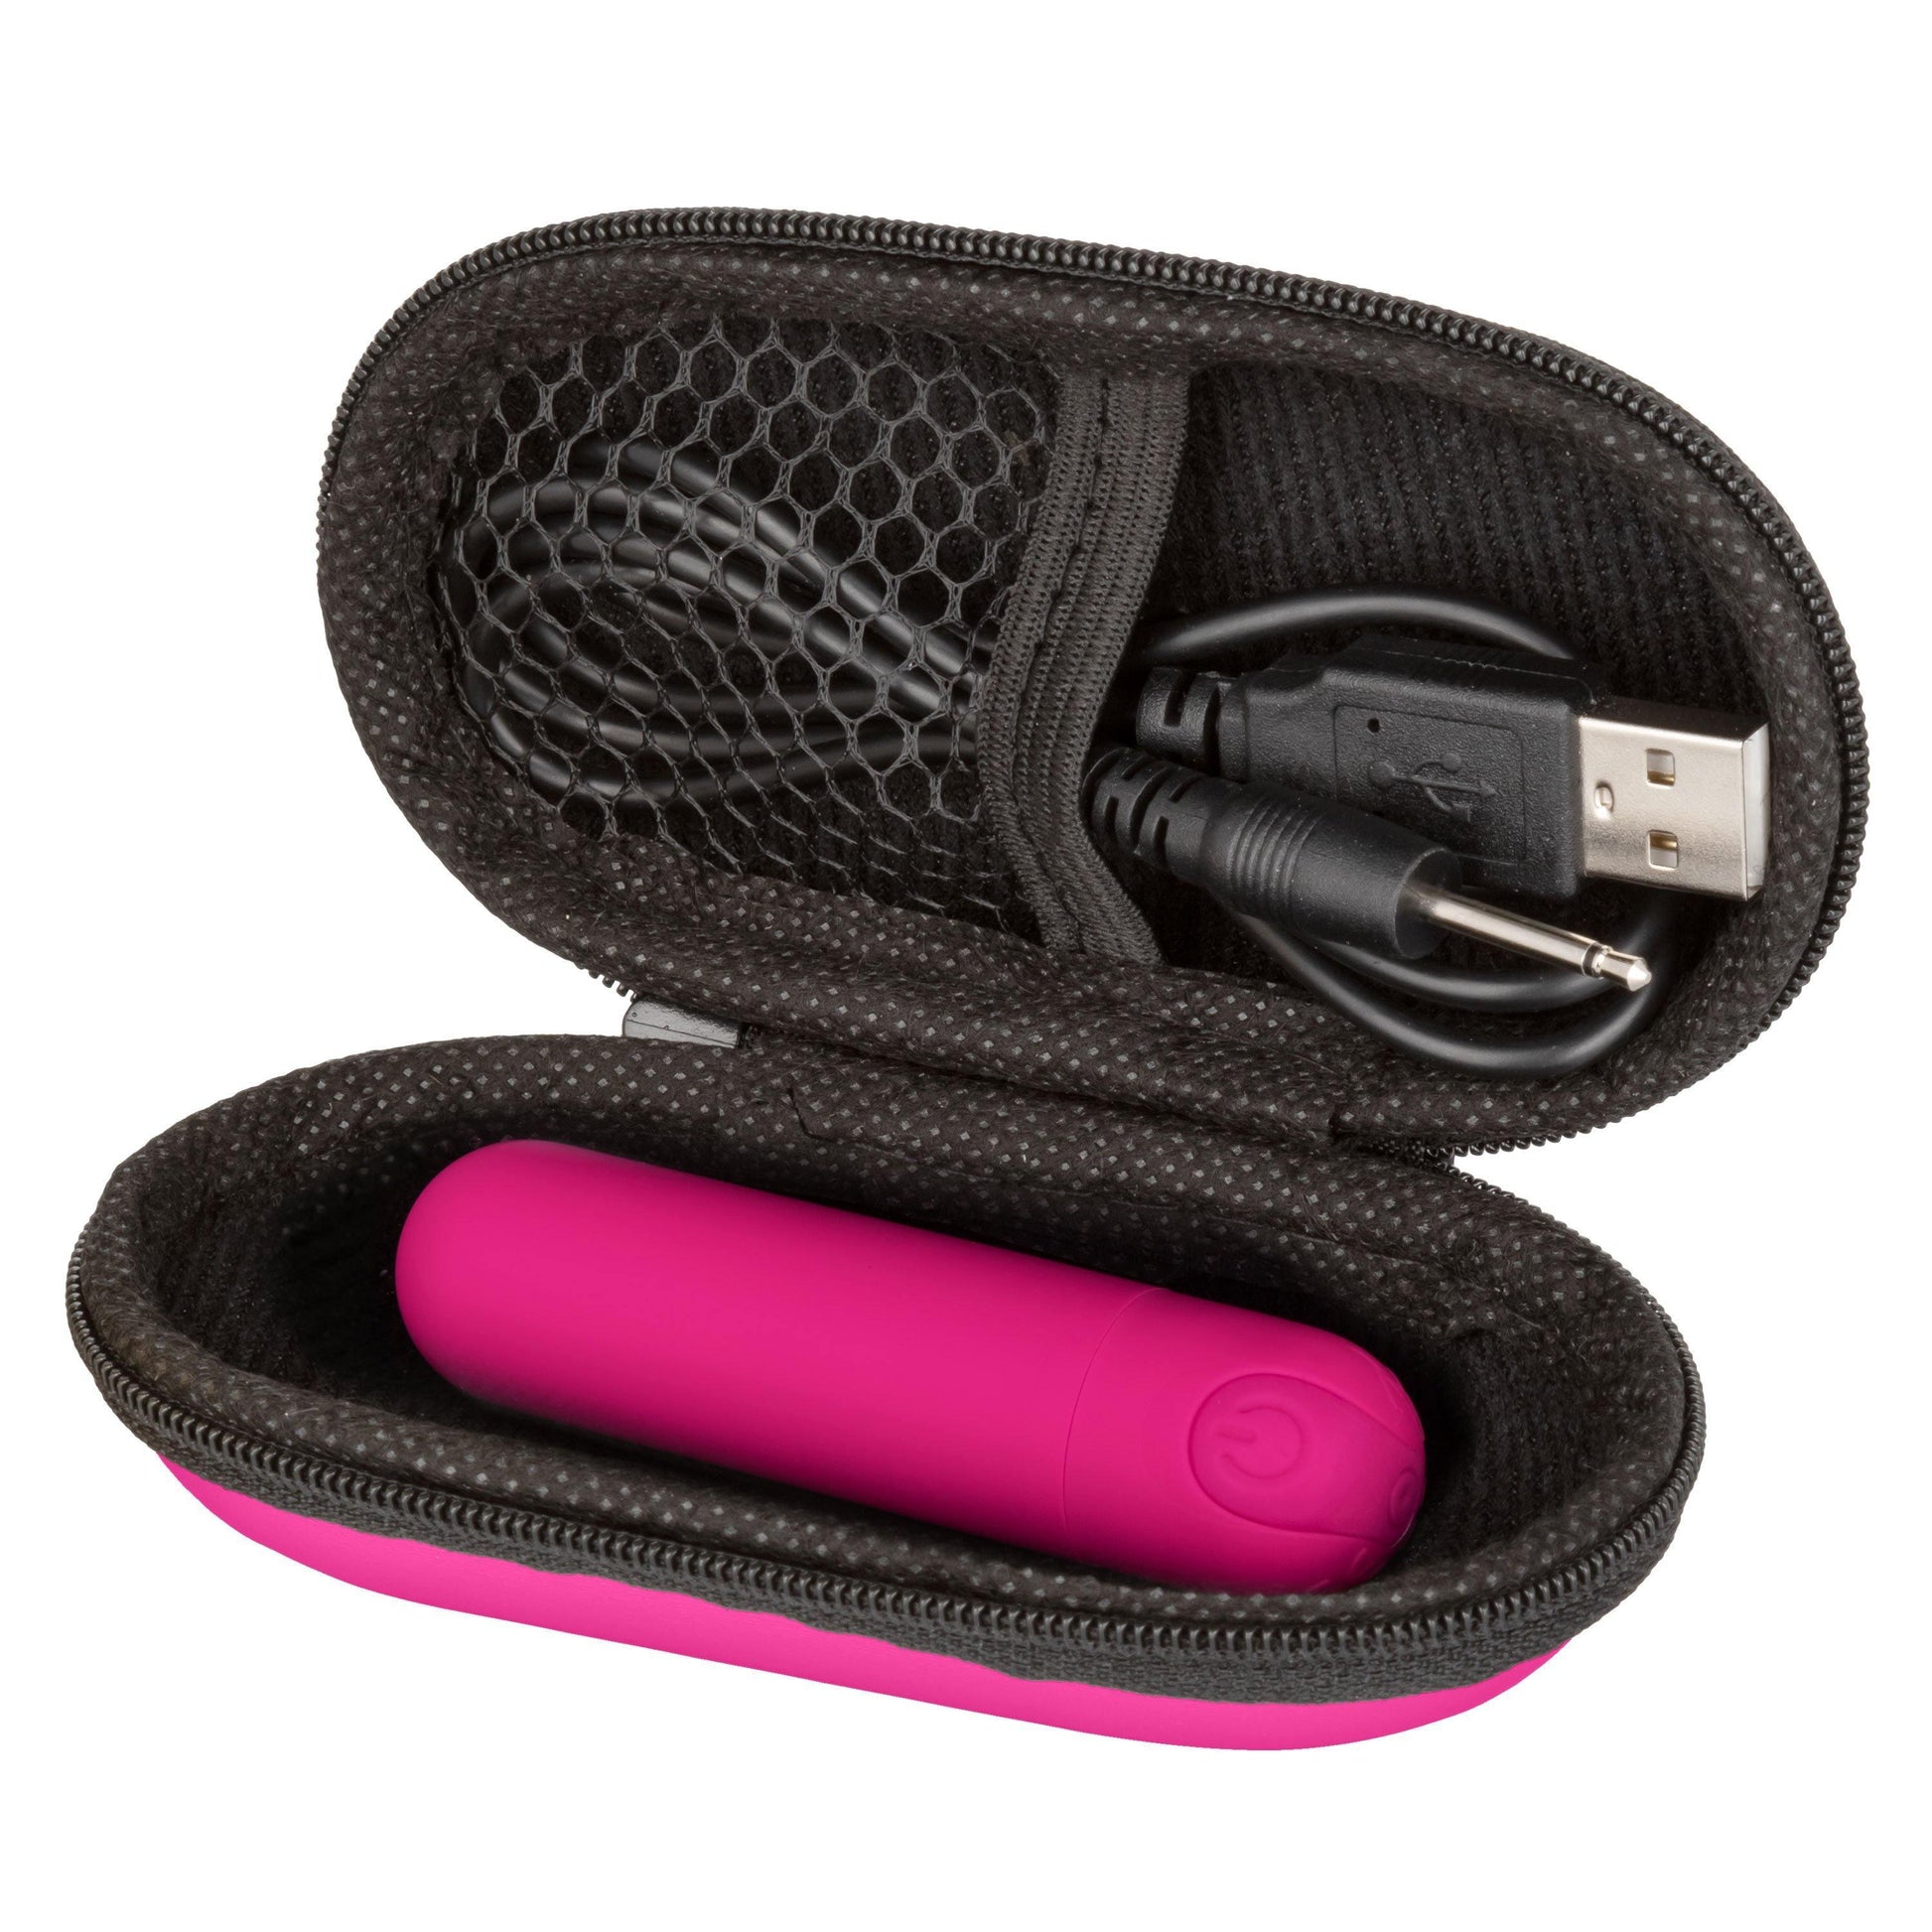 Rechargeable Hideaway Bullet - Pink - My Sex Toy Hub